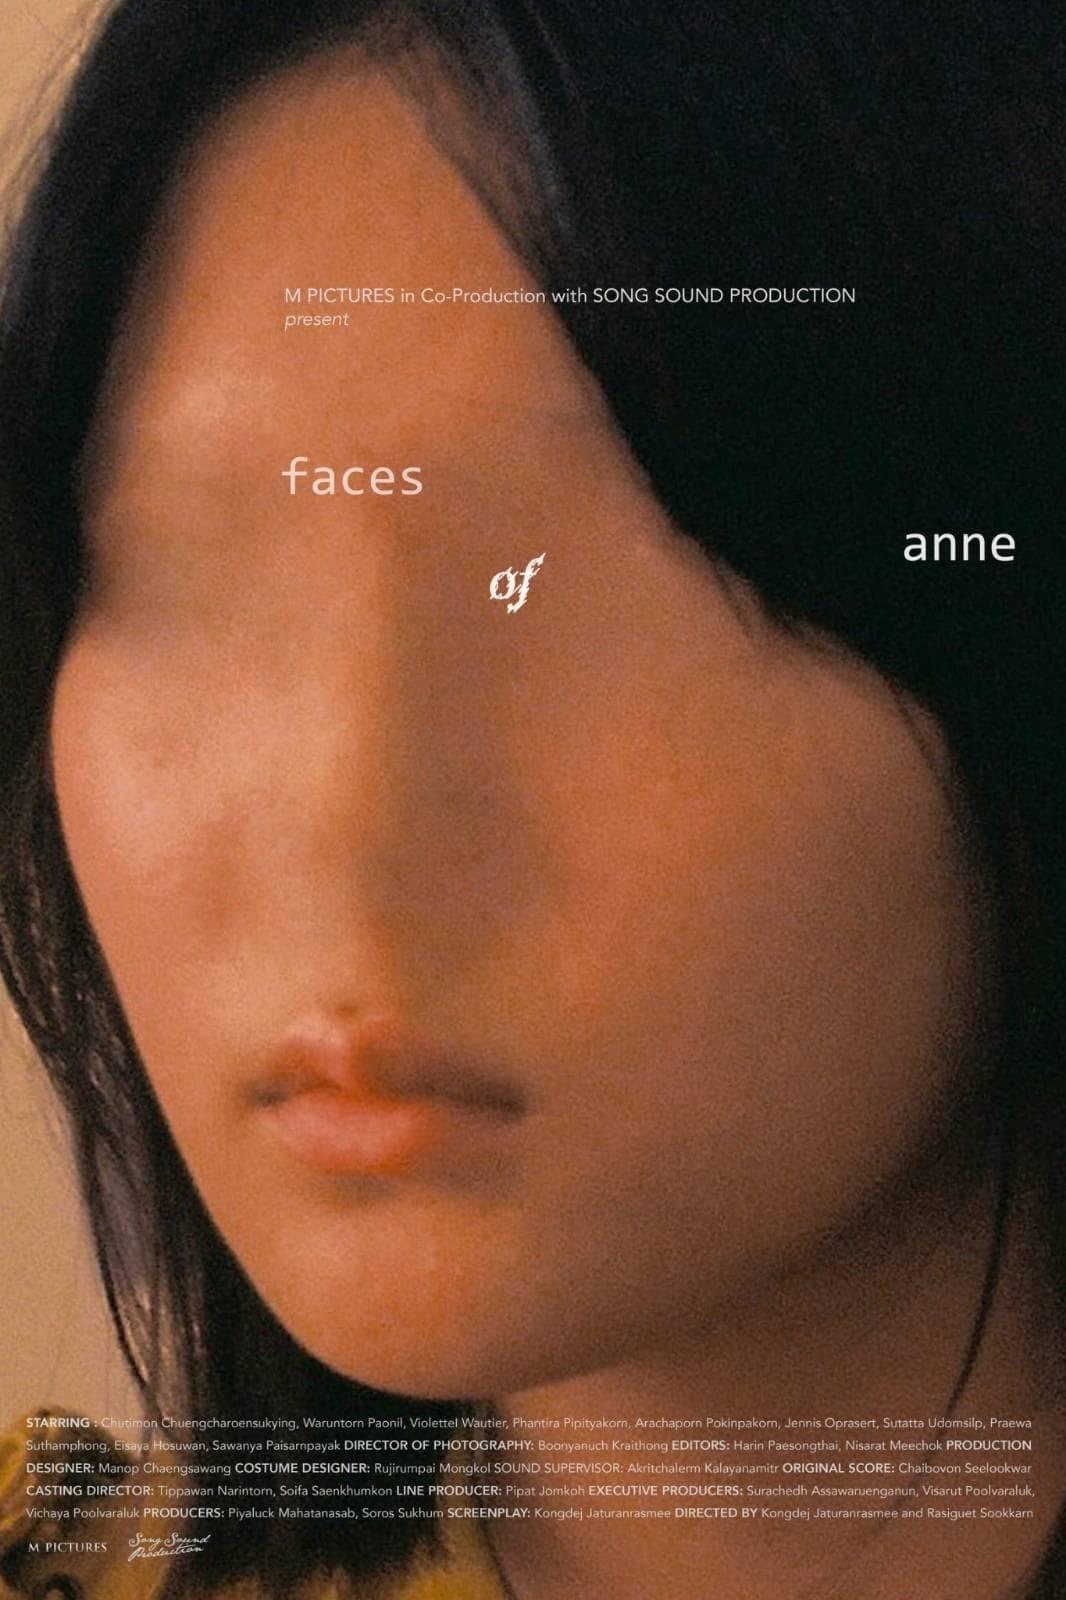 Faces of Anne poster